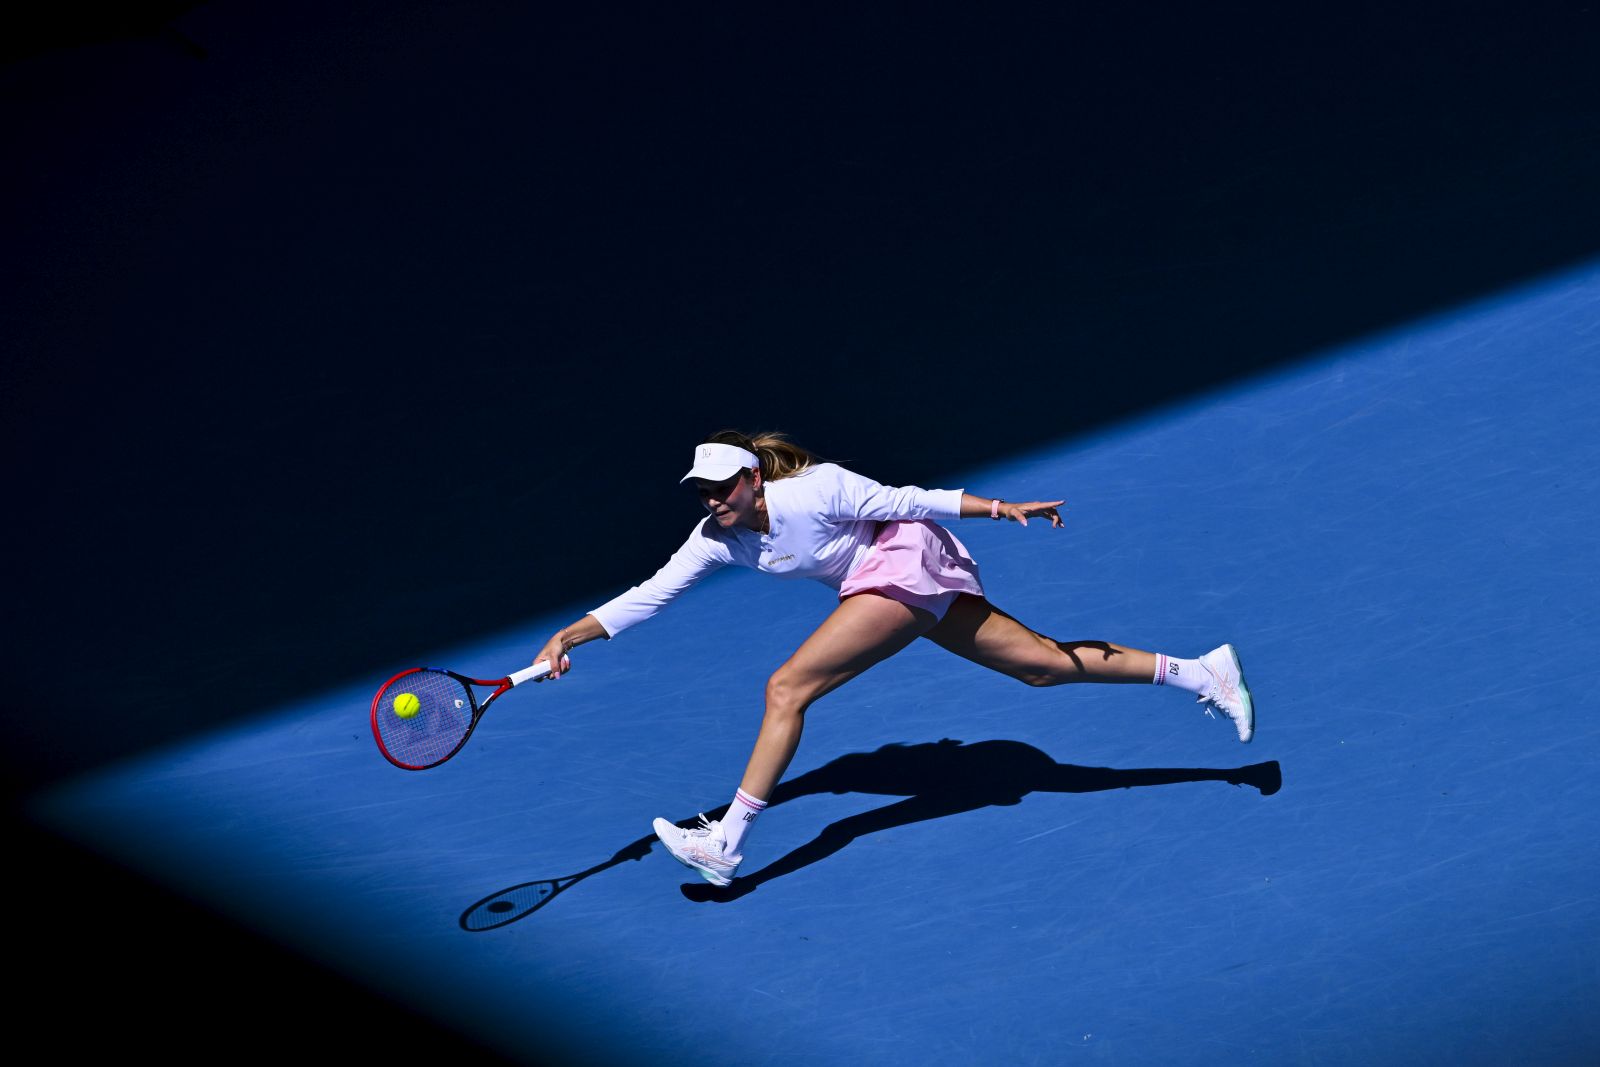 epa10419235 Donna Vekic of Croatia in action during her third round match against Nuria Parrizas Diaz of Spain at the 2023 Australian Open tennis tournament at Melbourne Park in Melbourne, Australia, 21 January 2023.  EPA/JOEL CARRETT  AUSTRALIA AND NEW ZEALAND OUT